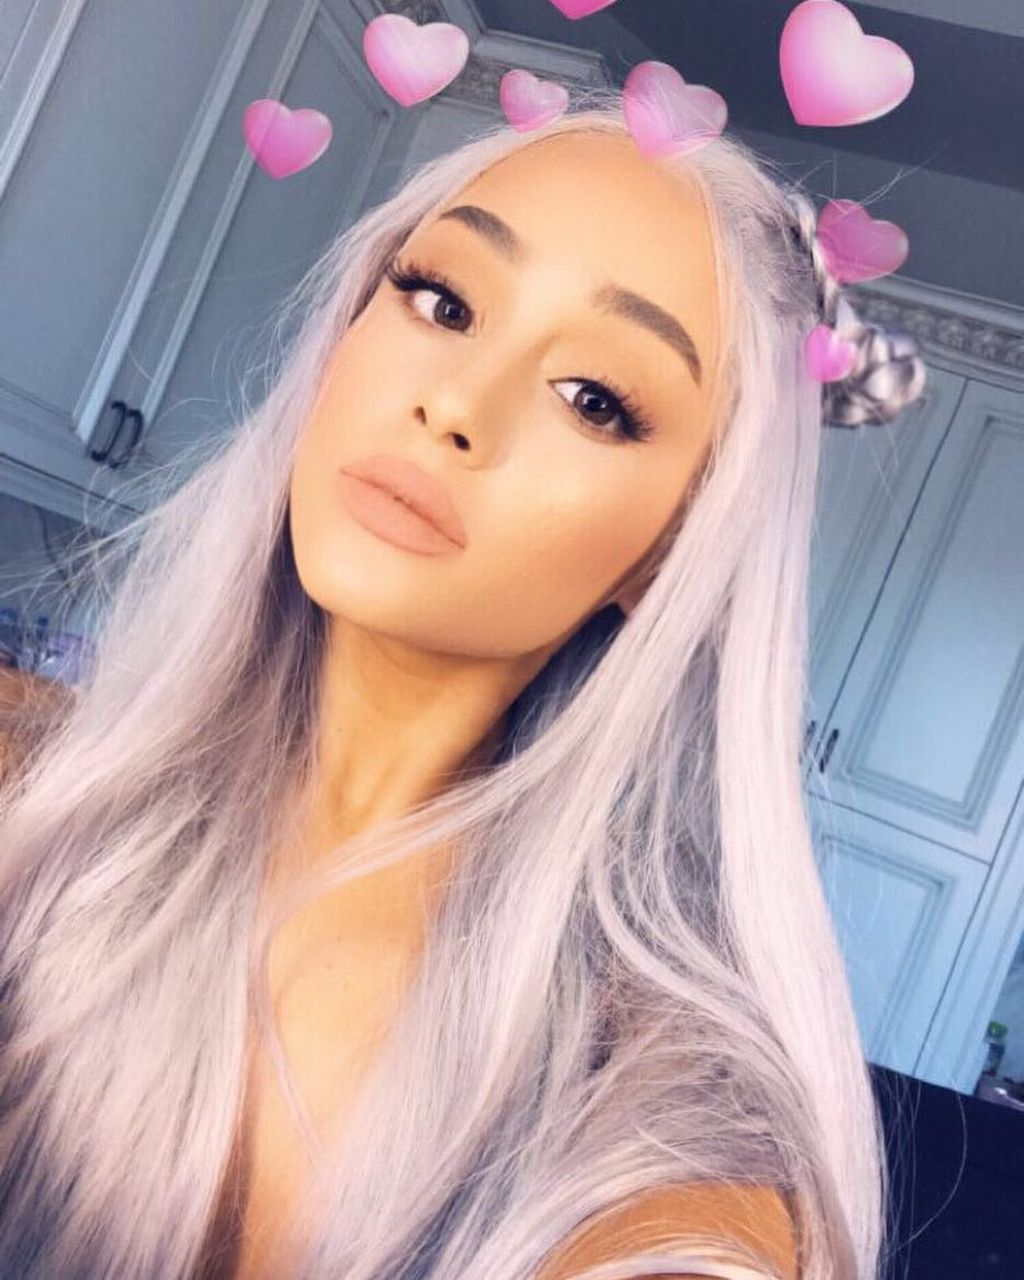 Ariana Grandes Unlikely New Look 9Style